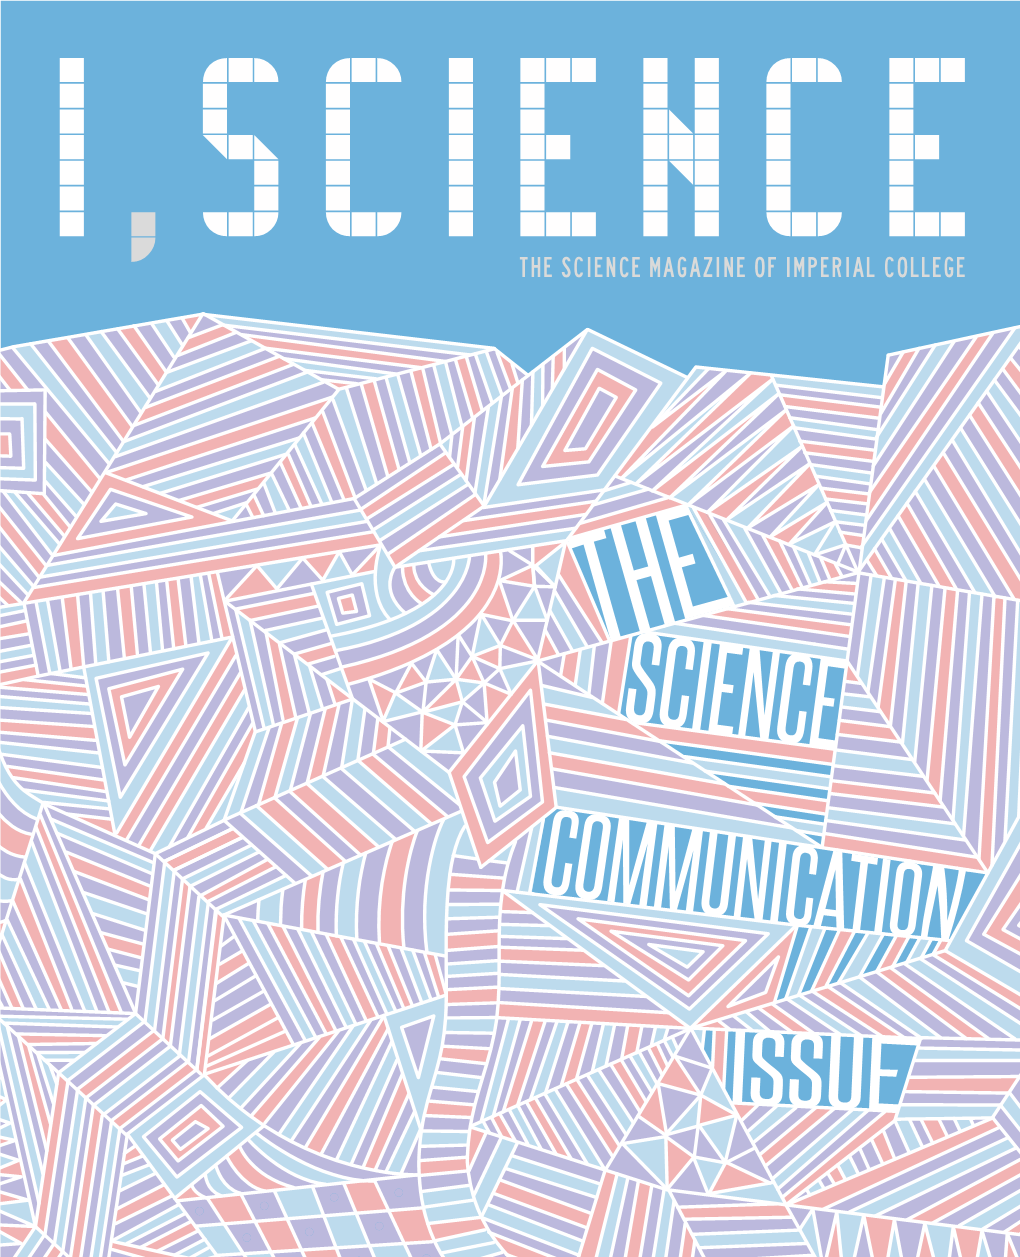 The Science Communication Special